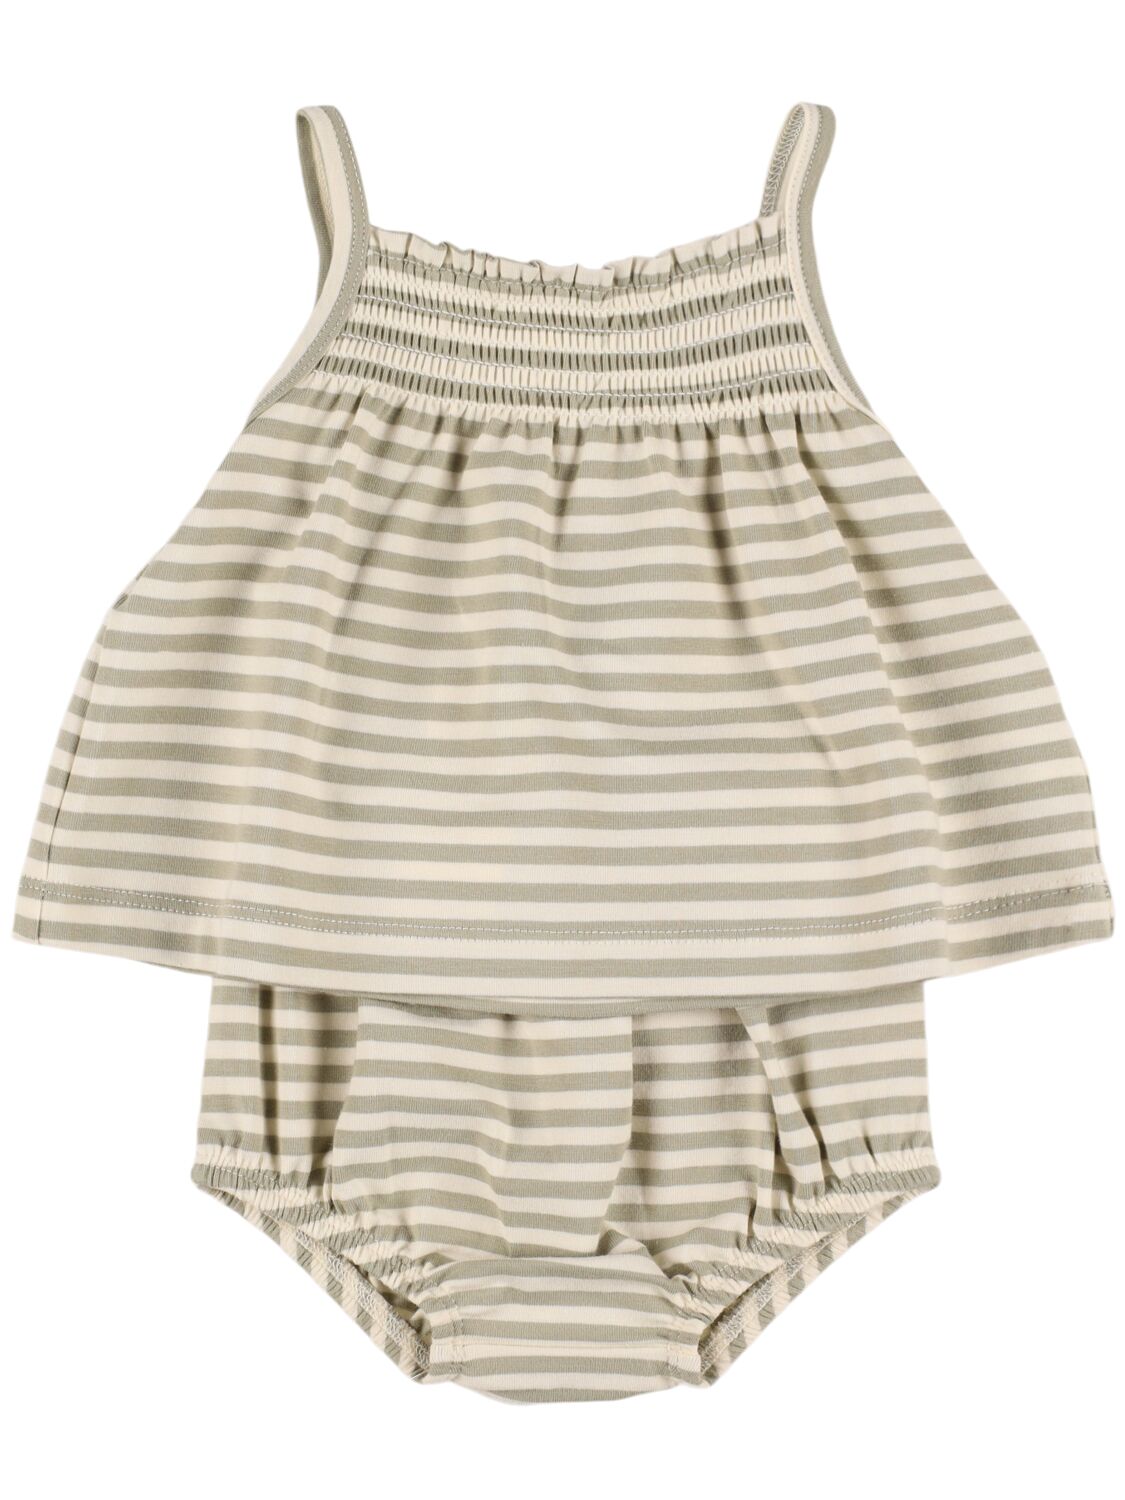 Image of Organic Cotton Top & Diaper Cover